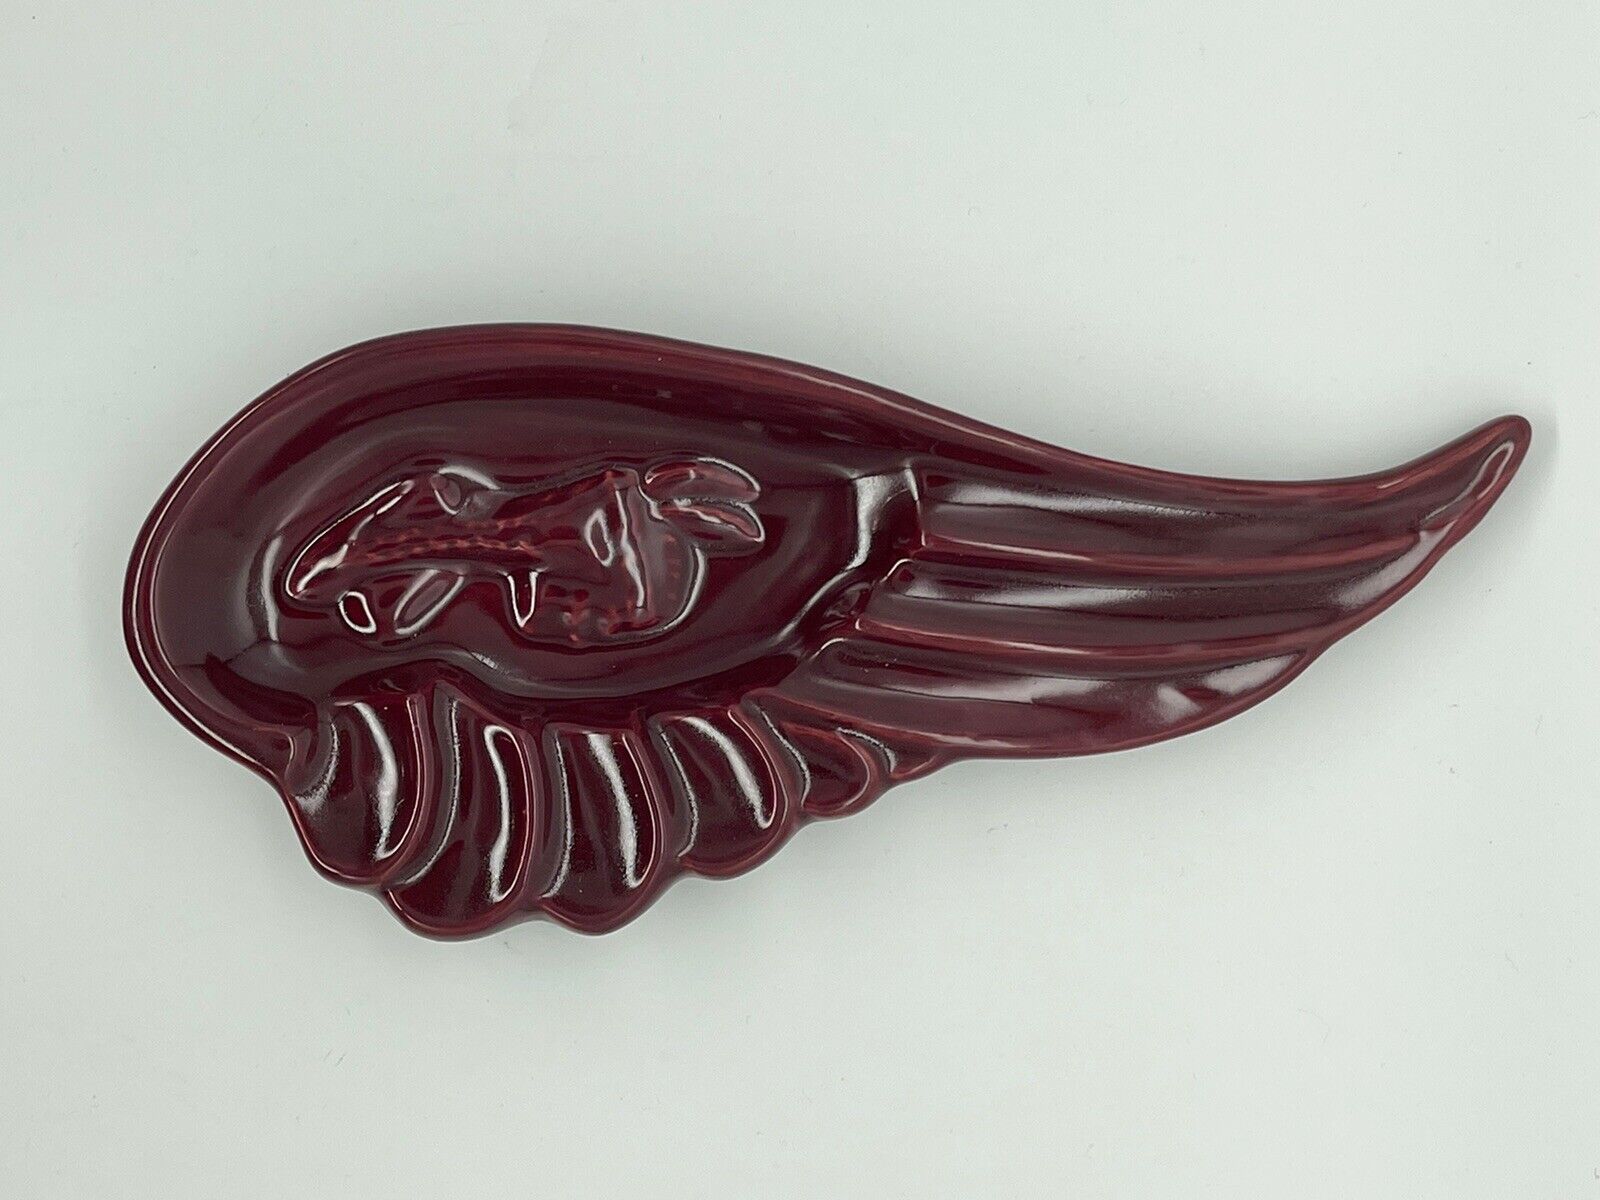 1993 Redwing Christmas Trinket Dish made for Puget Sound Chapter in Deer Park WI